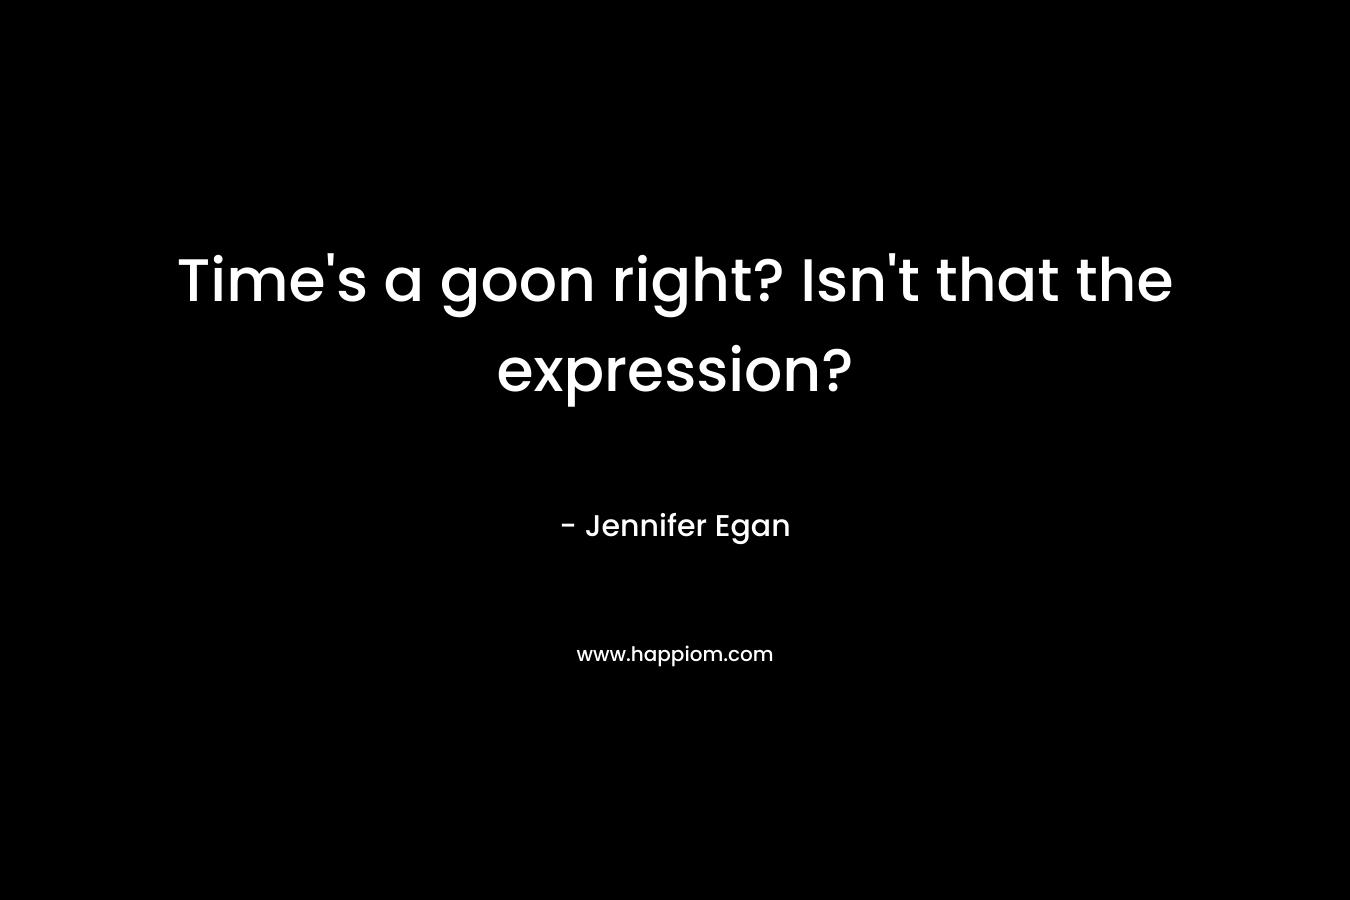 Time’s a goon right? Isn’t that the expression? – Jennifer Egan